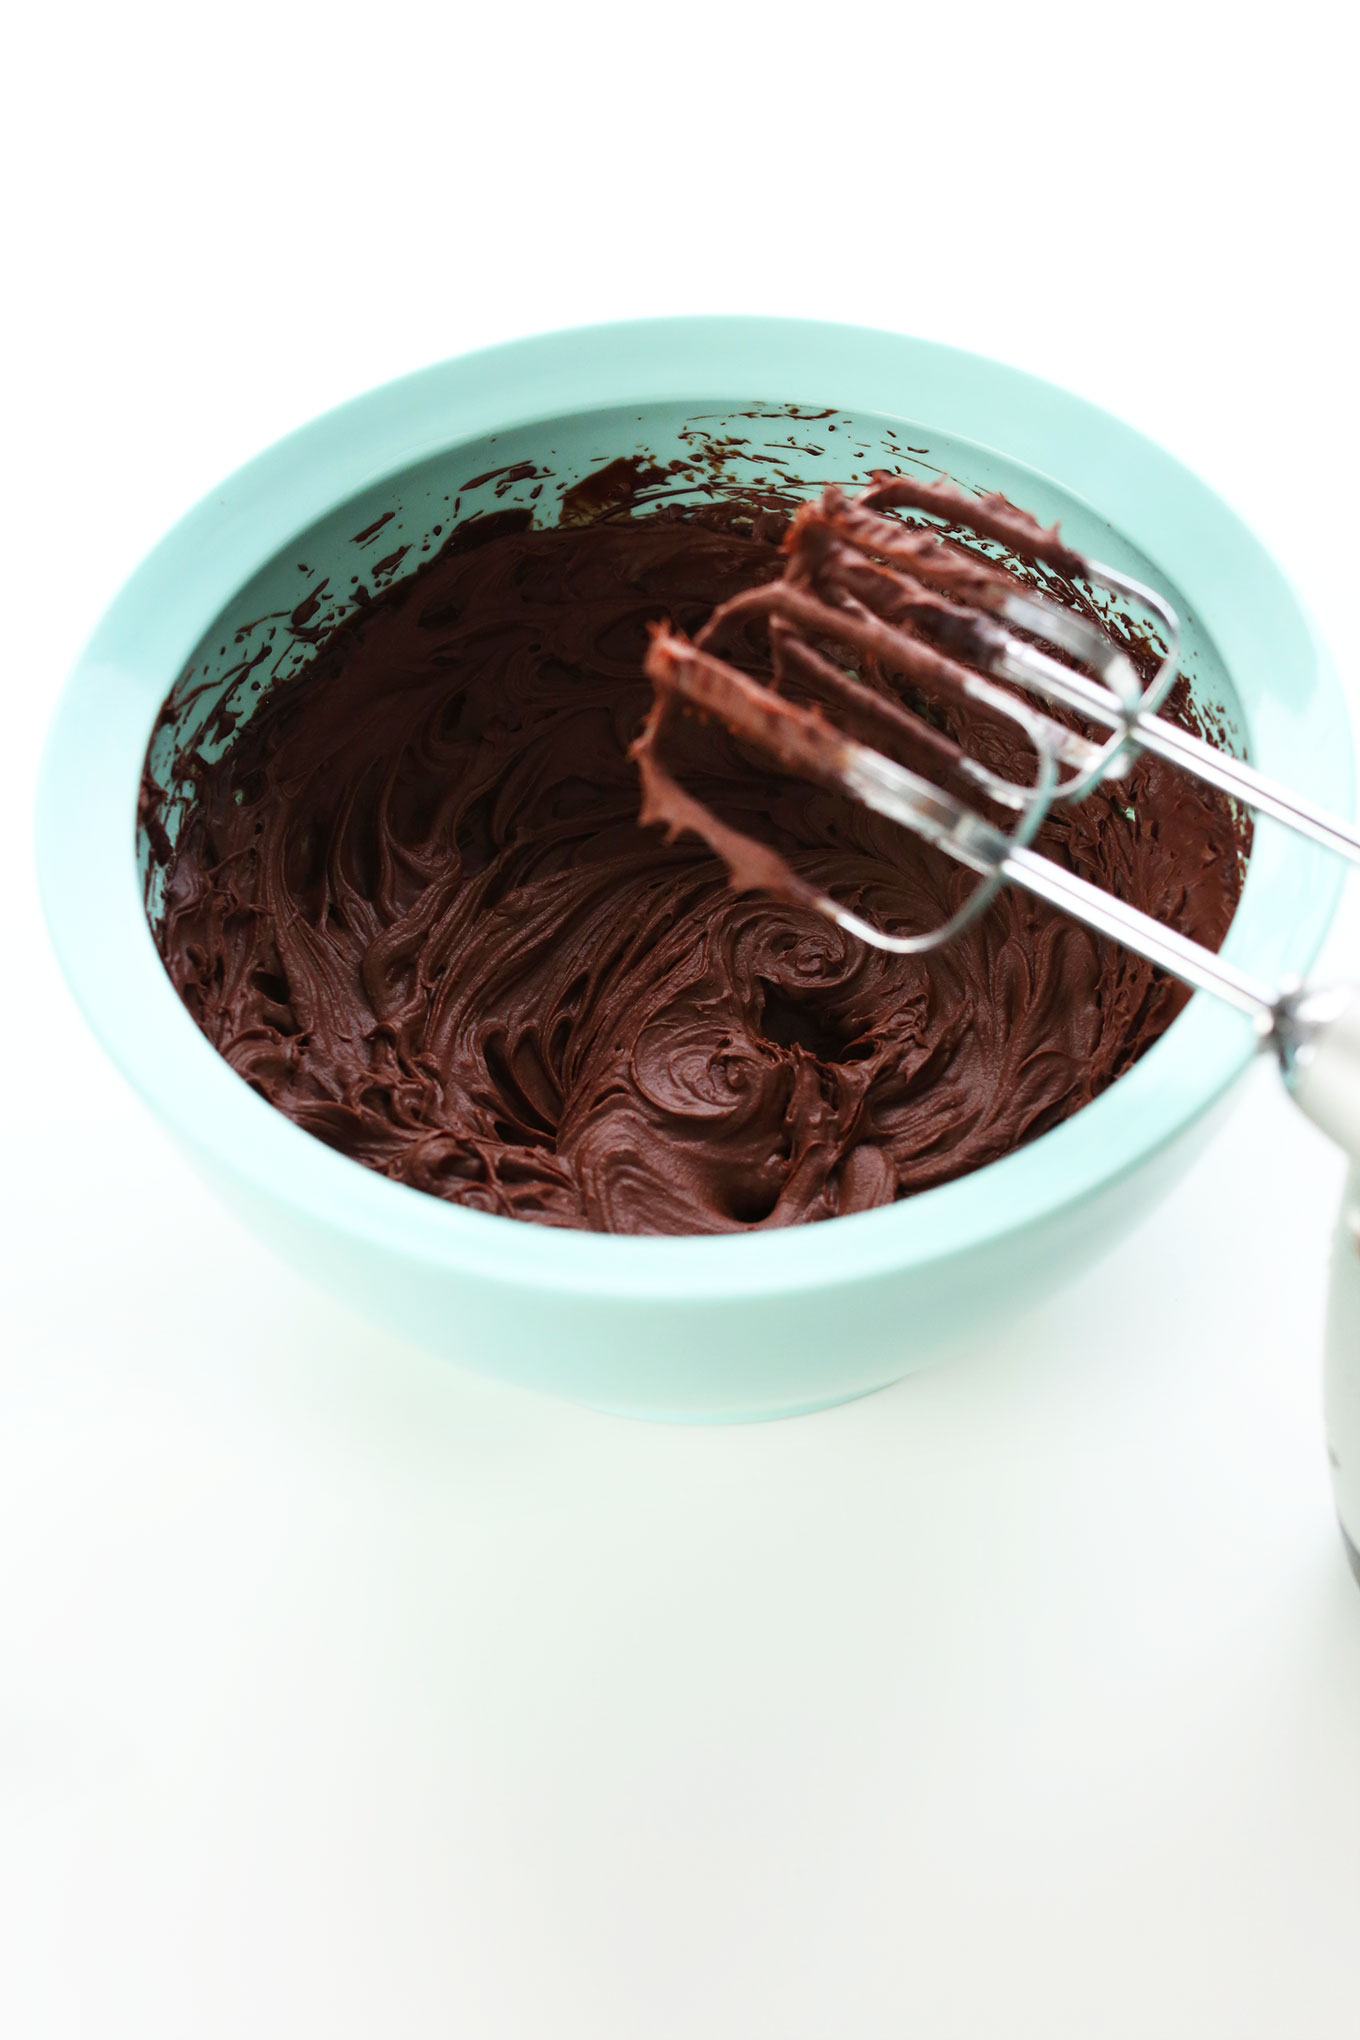 Electric mixer blades resting over a bowl of the Best Vegan Chocolate Ganache Frosting